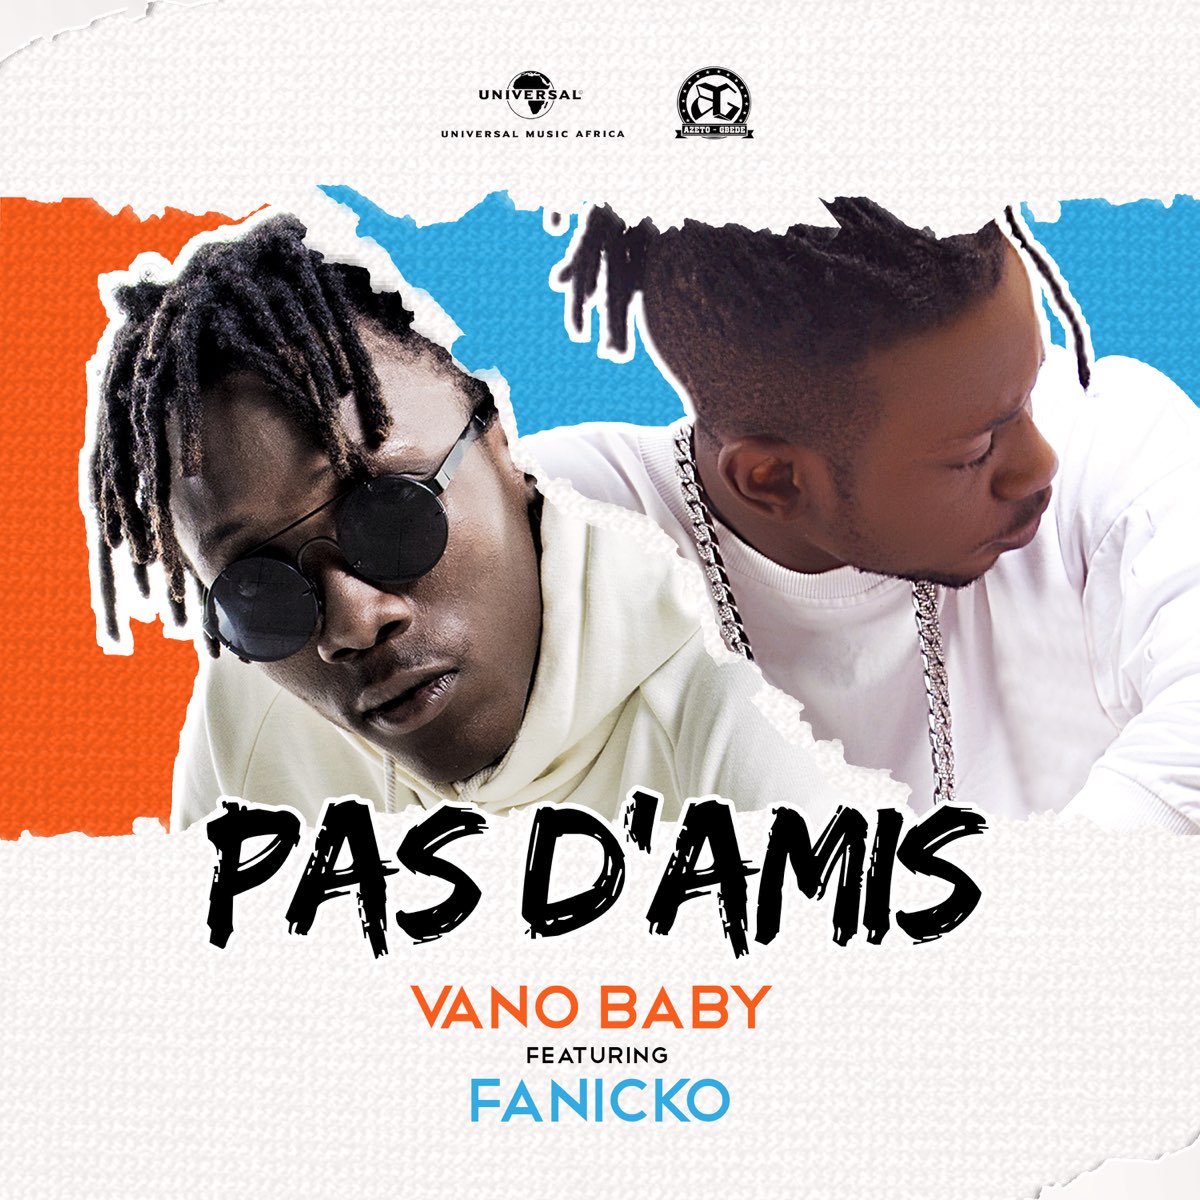 Pas d'amis (feat. Fanicko) - Single by Vano Baby on Apple Music